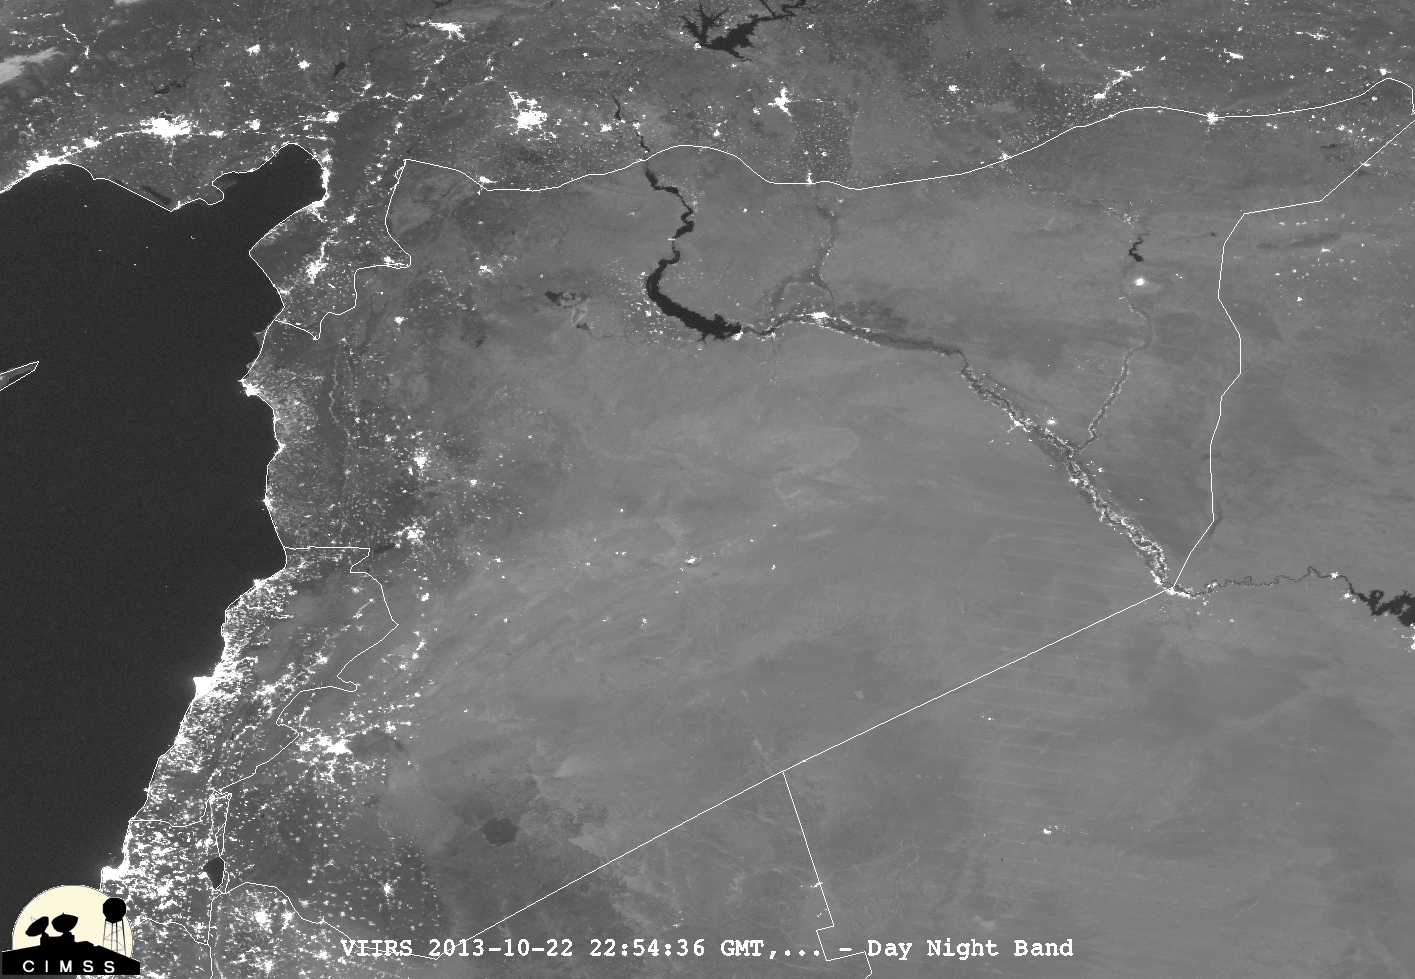 Suomi NPP VIIRS 0.7 Âµm Day/Night Band images